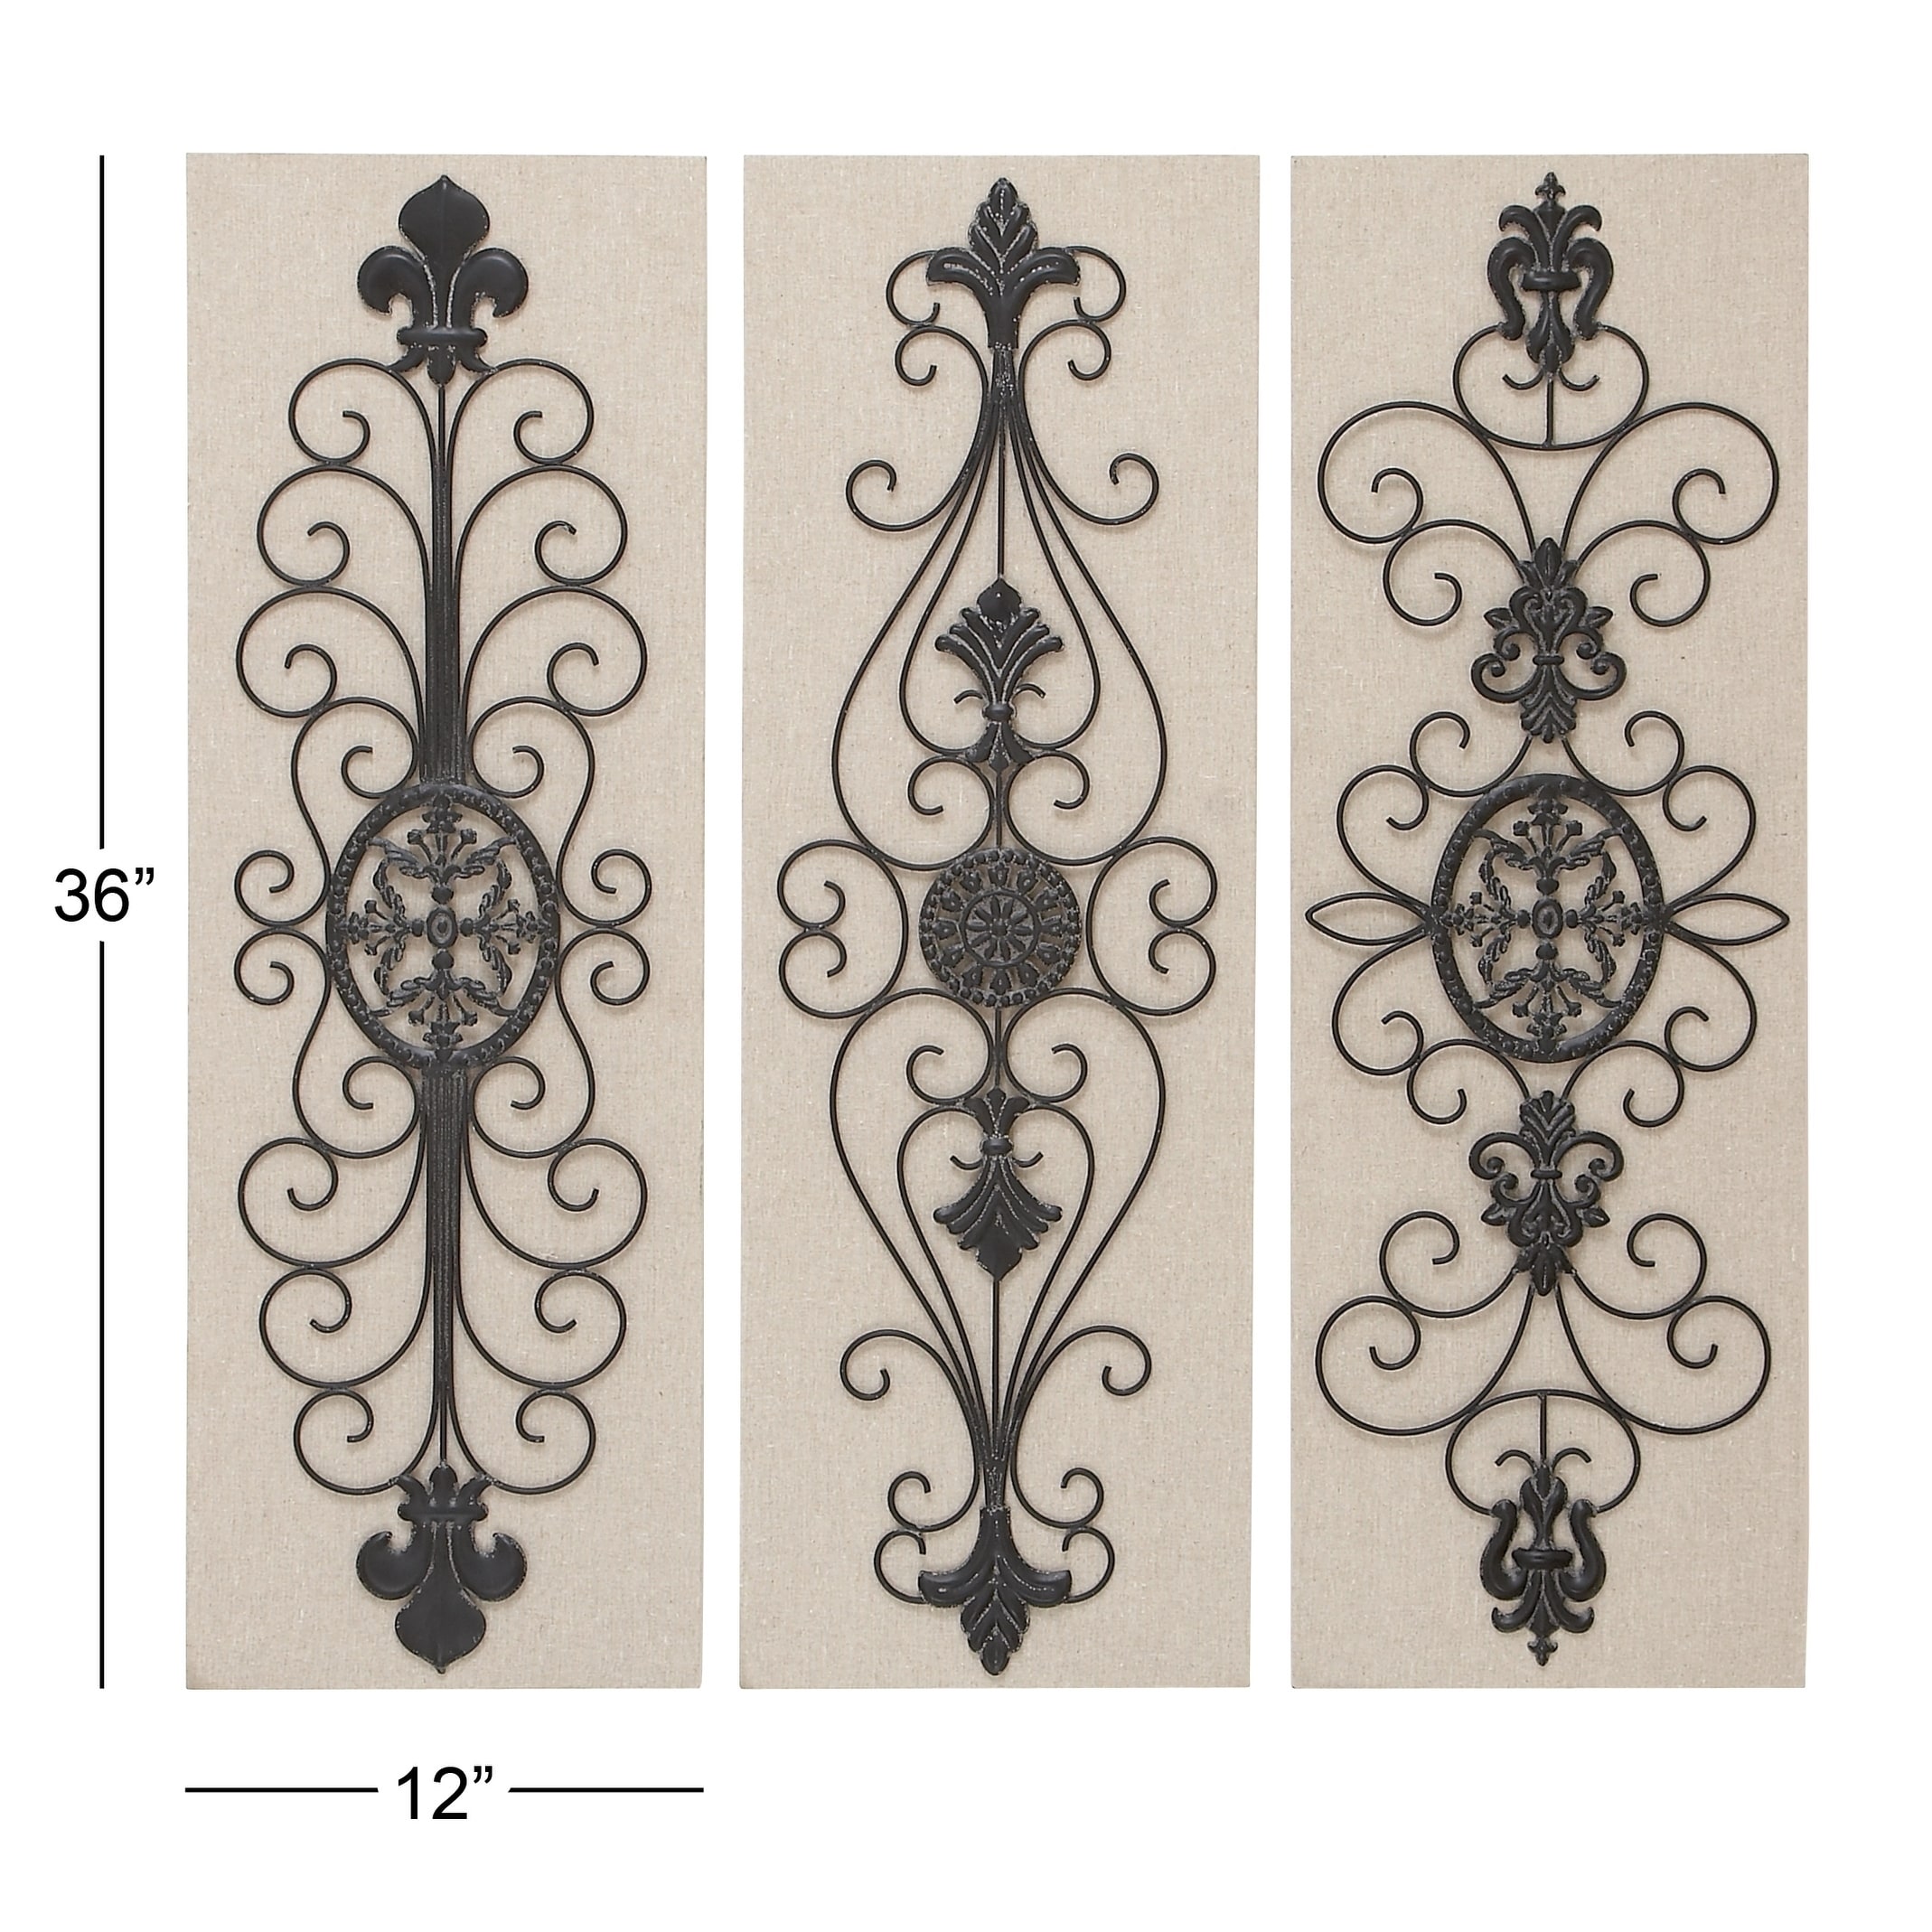 Studio 350 Wood Metal Decor Set of 3, 36 inches high, 12 inches wide Bed  Bath  Beyond 9116320